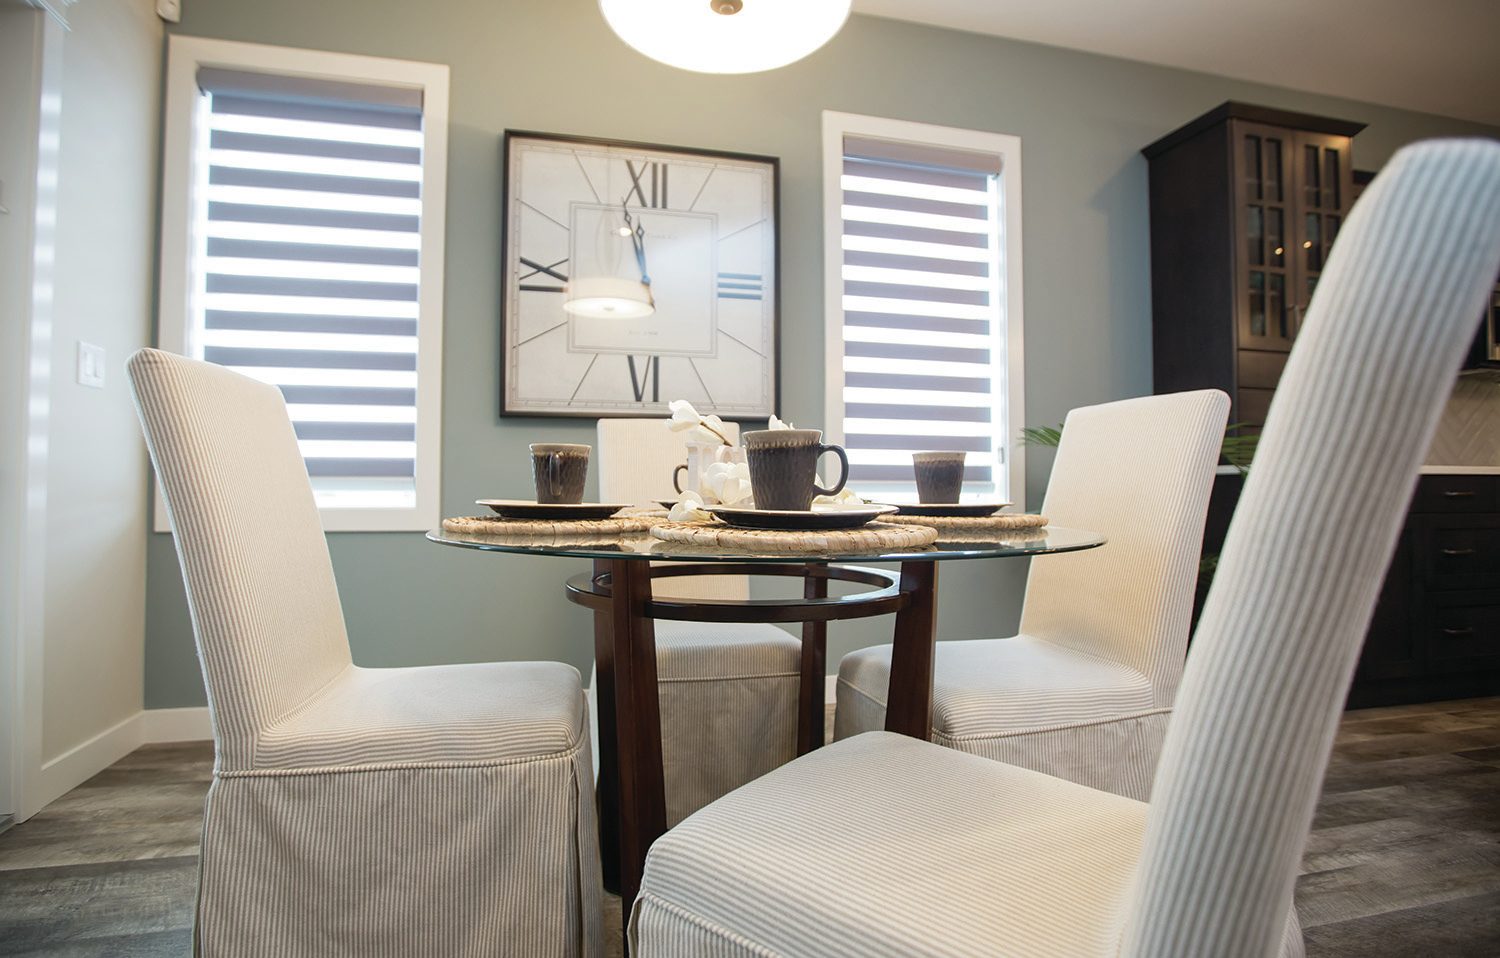 BE OUR GUEST - This dining area in a True-Line Homes show home in Laredo shows that you don’t need a huge dining table to make a space feel elegant and inviting.